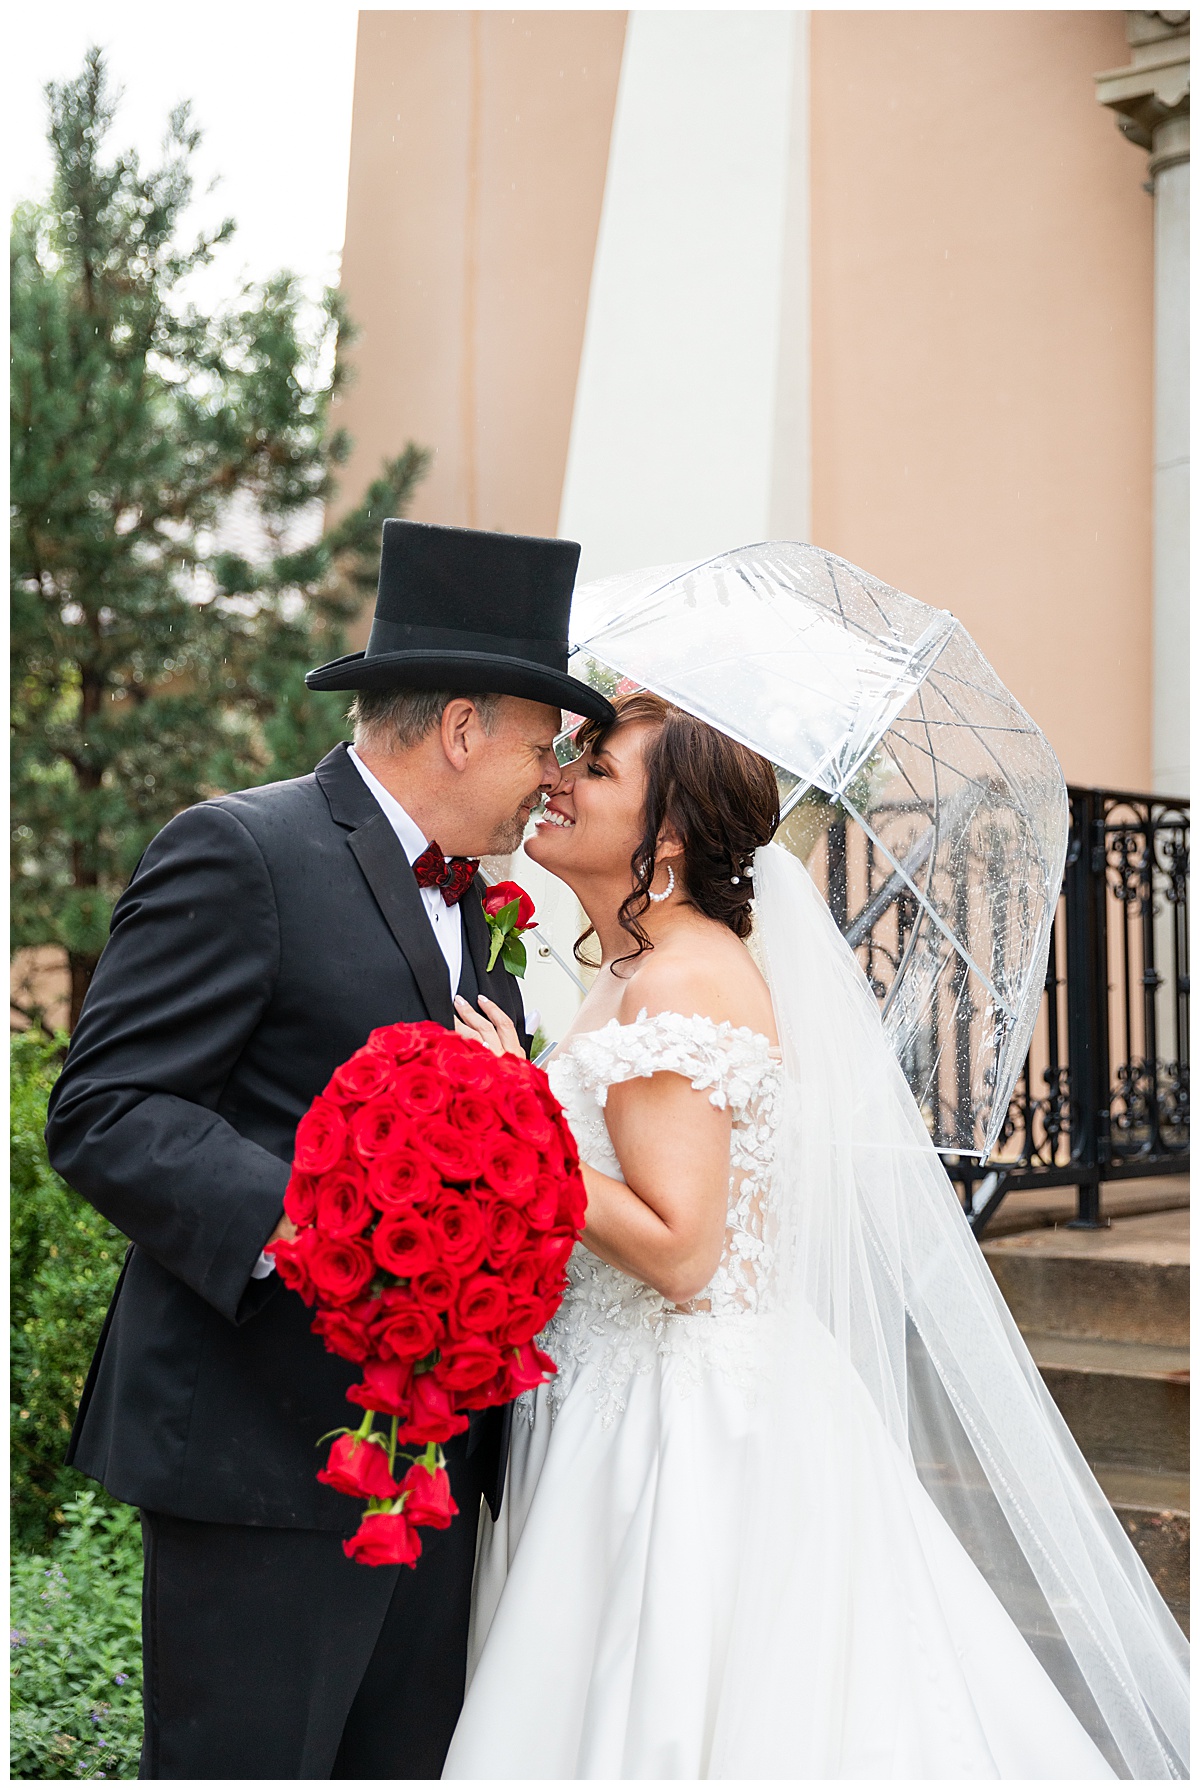 Couples portraits of a bride and groom during their Broadmoor wedding. The groom is wearing a black suit and black top hat. The bride is wearing a lace ballgown and a long veil. They are posing with a clear umbrella.